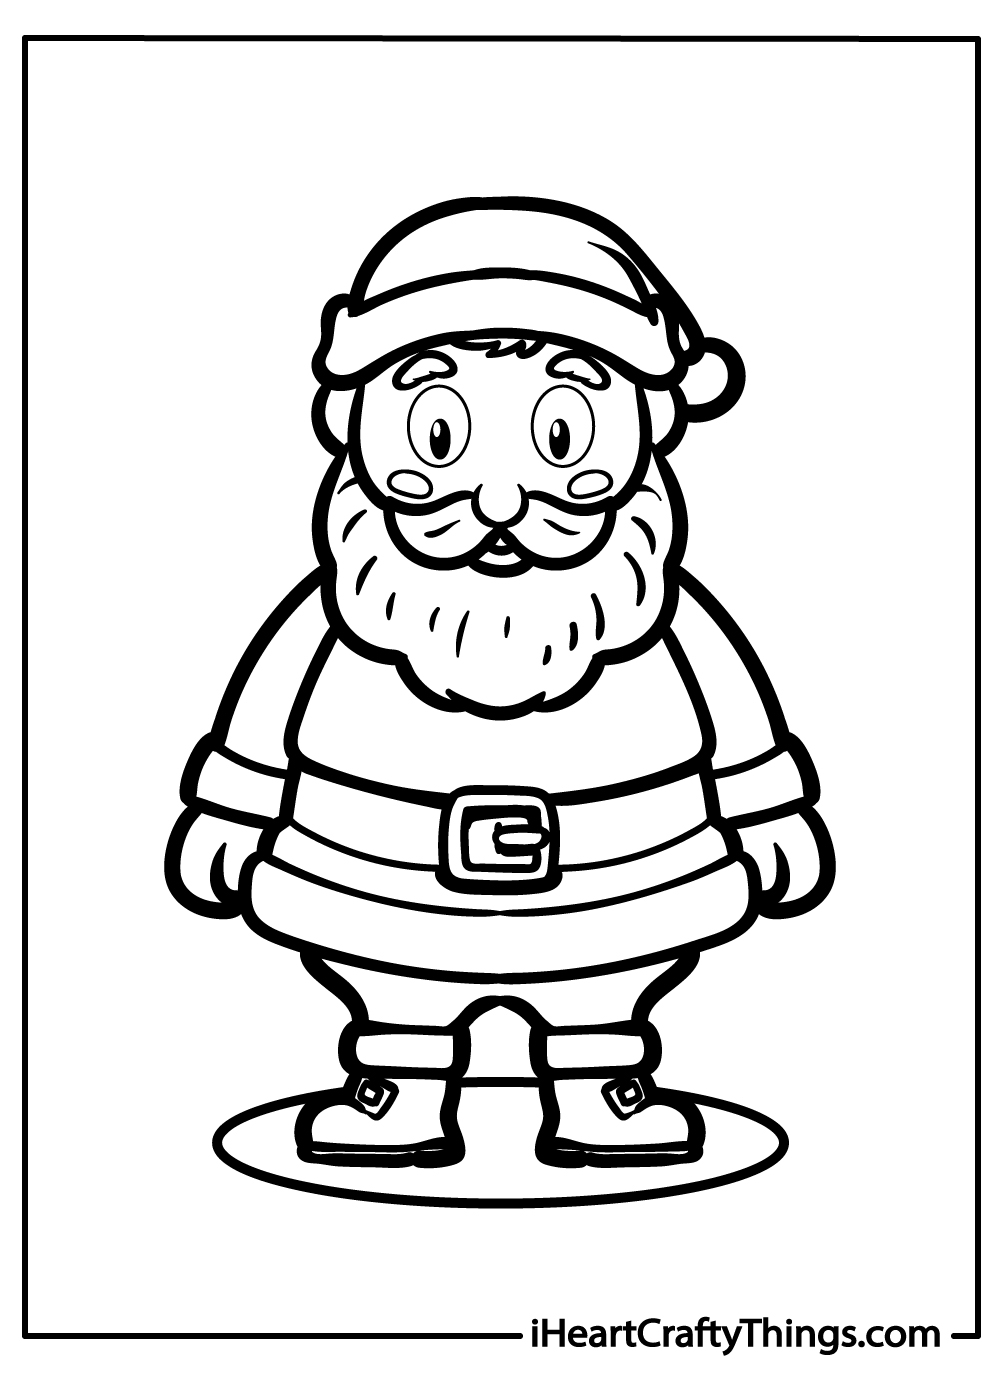 Cute Santa coloring pages for kids